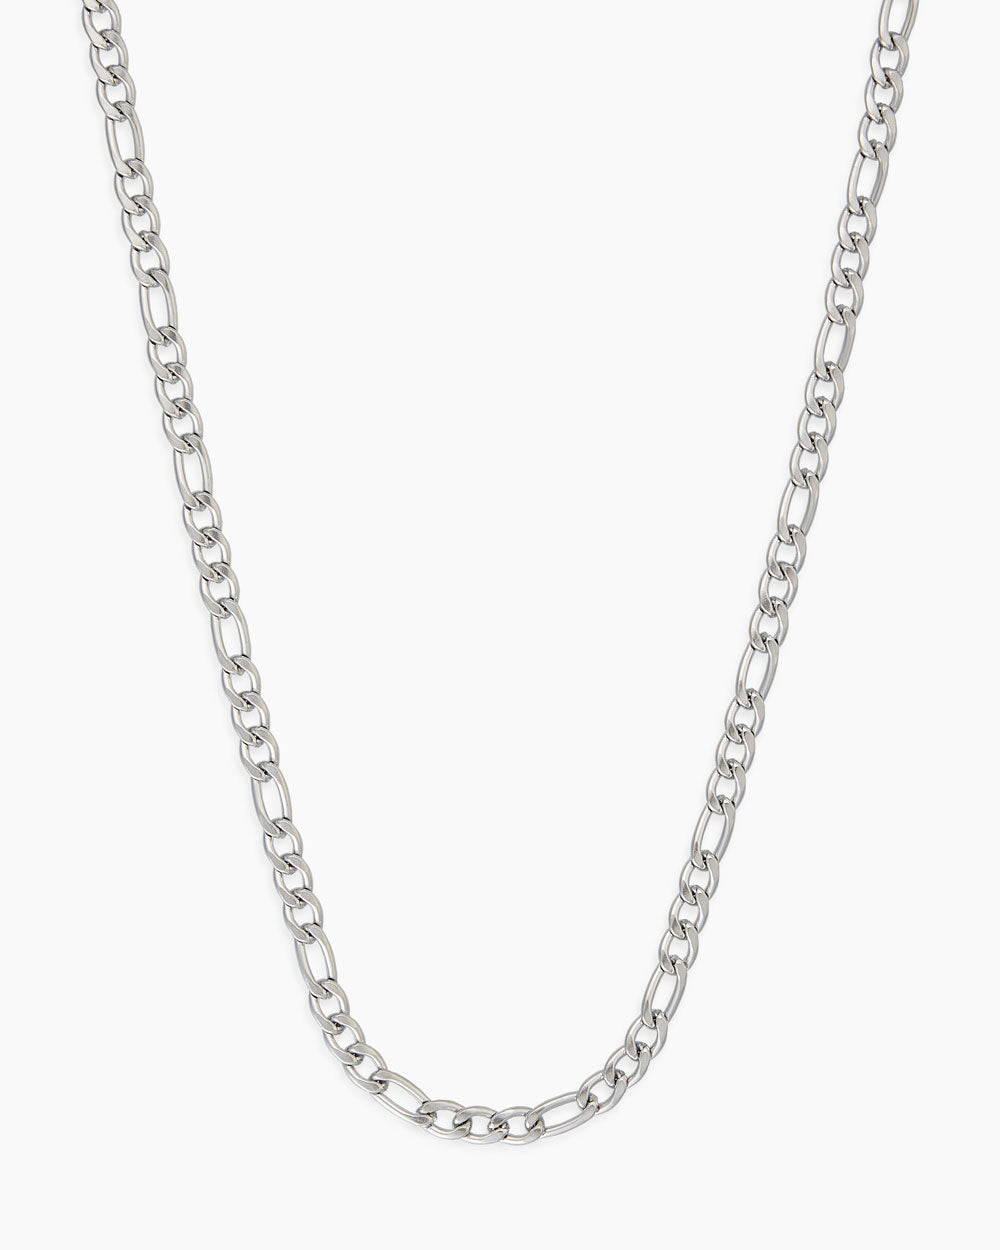 Cameron Silver Necklace - Penny Pairs